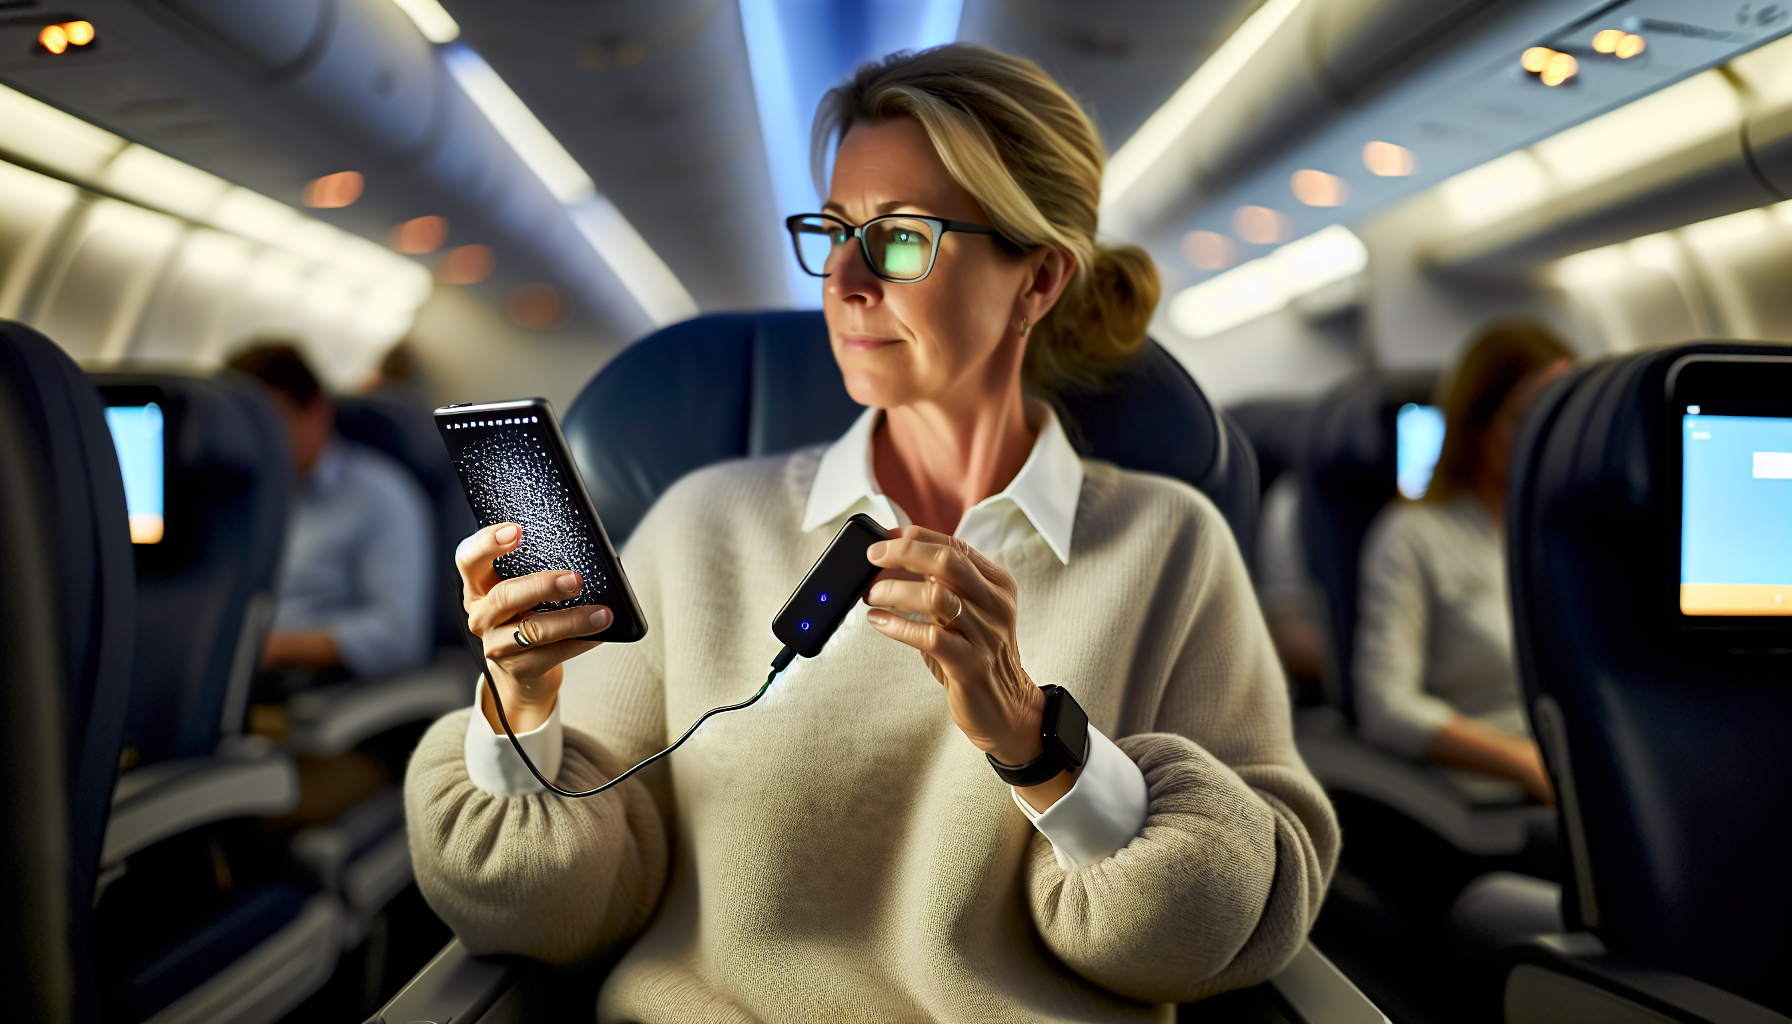 A person charging their smartphone mid-flight using a portable charger